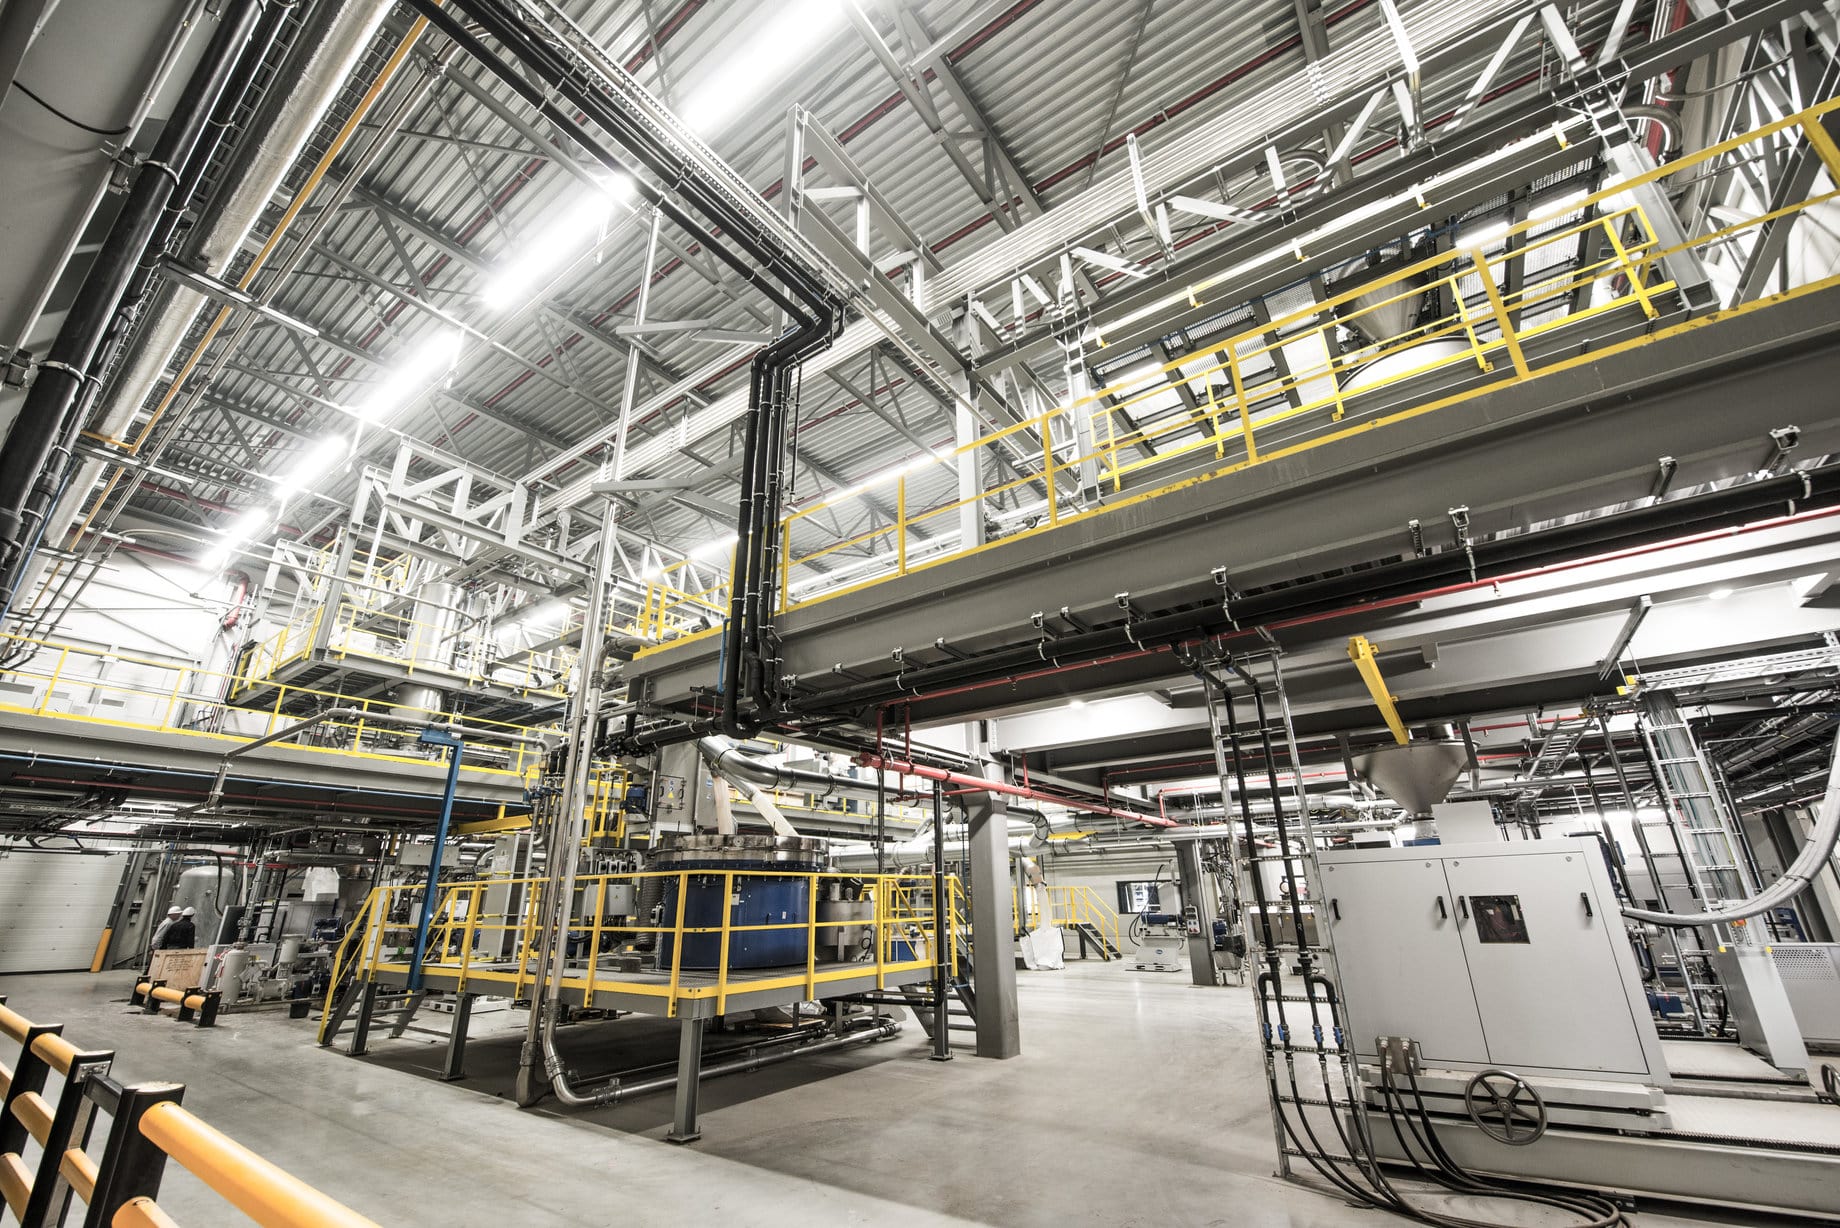 Quality Circular Polymers’ Netherlands recycling facility is capable of converting consumer waste
                                    into 25,000 tons of polypropylene (PP) and high-density polyethylene (HDPE) resin each year.